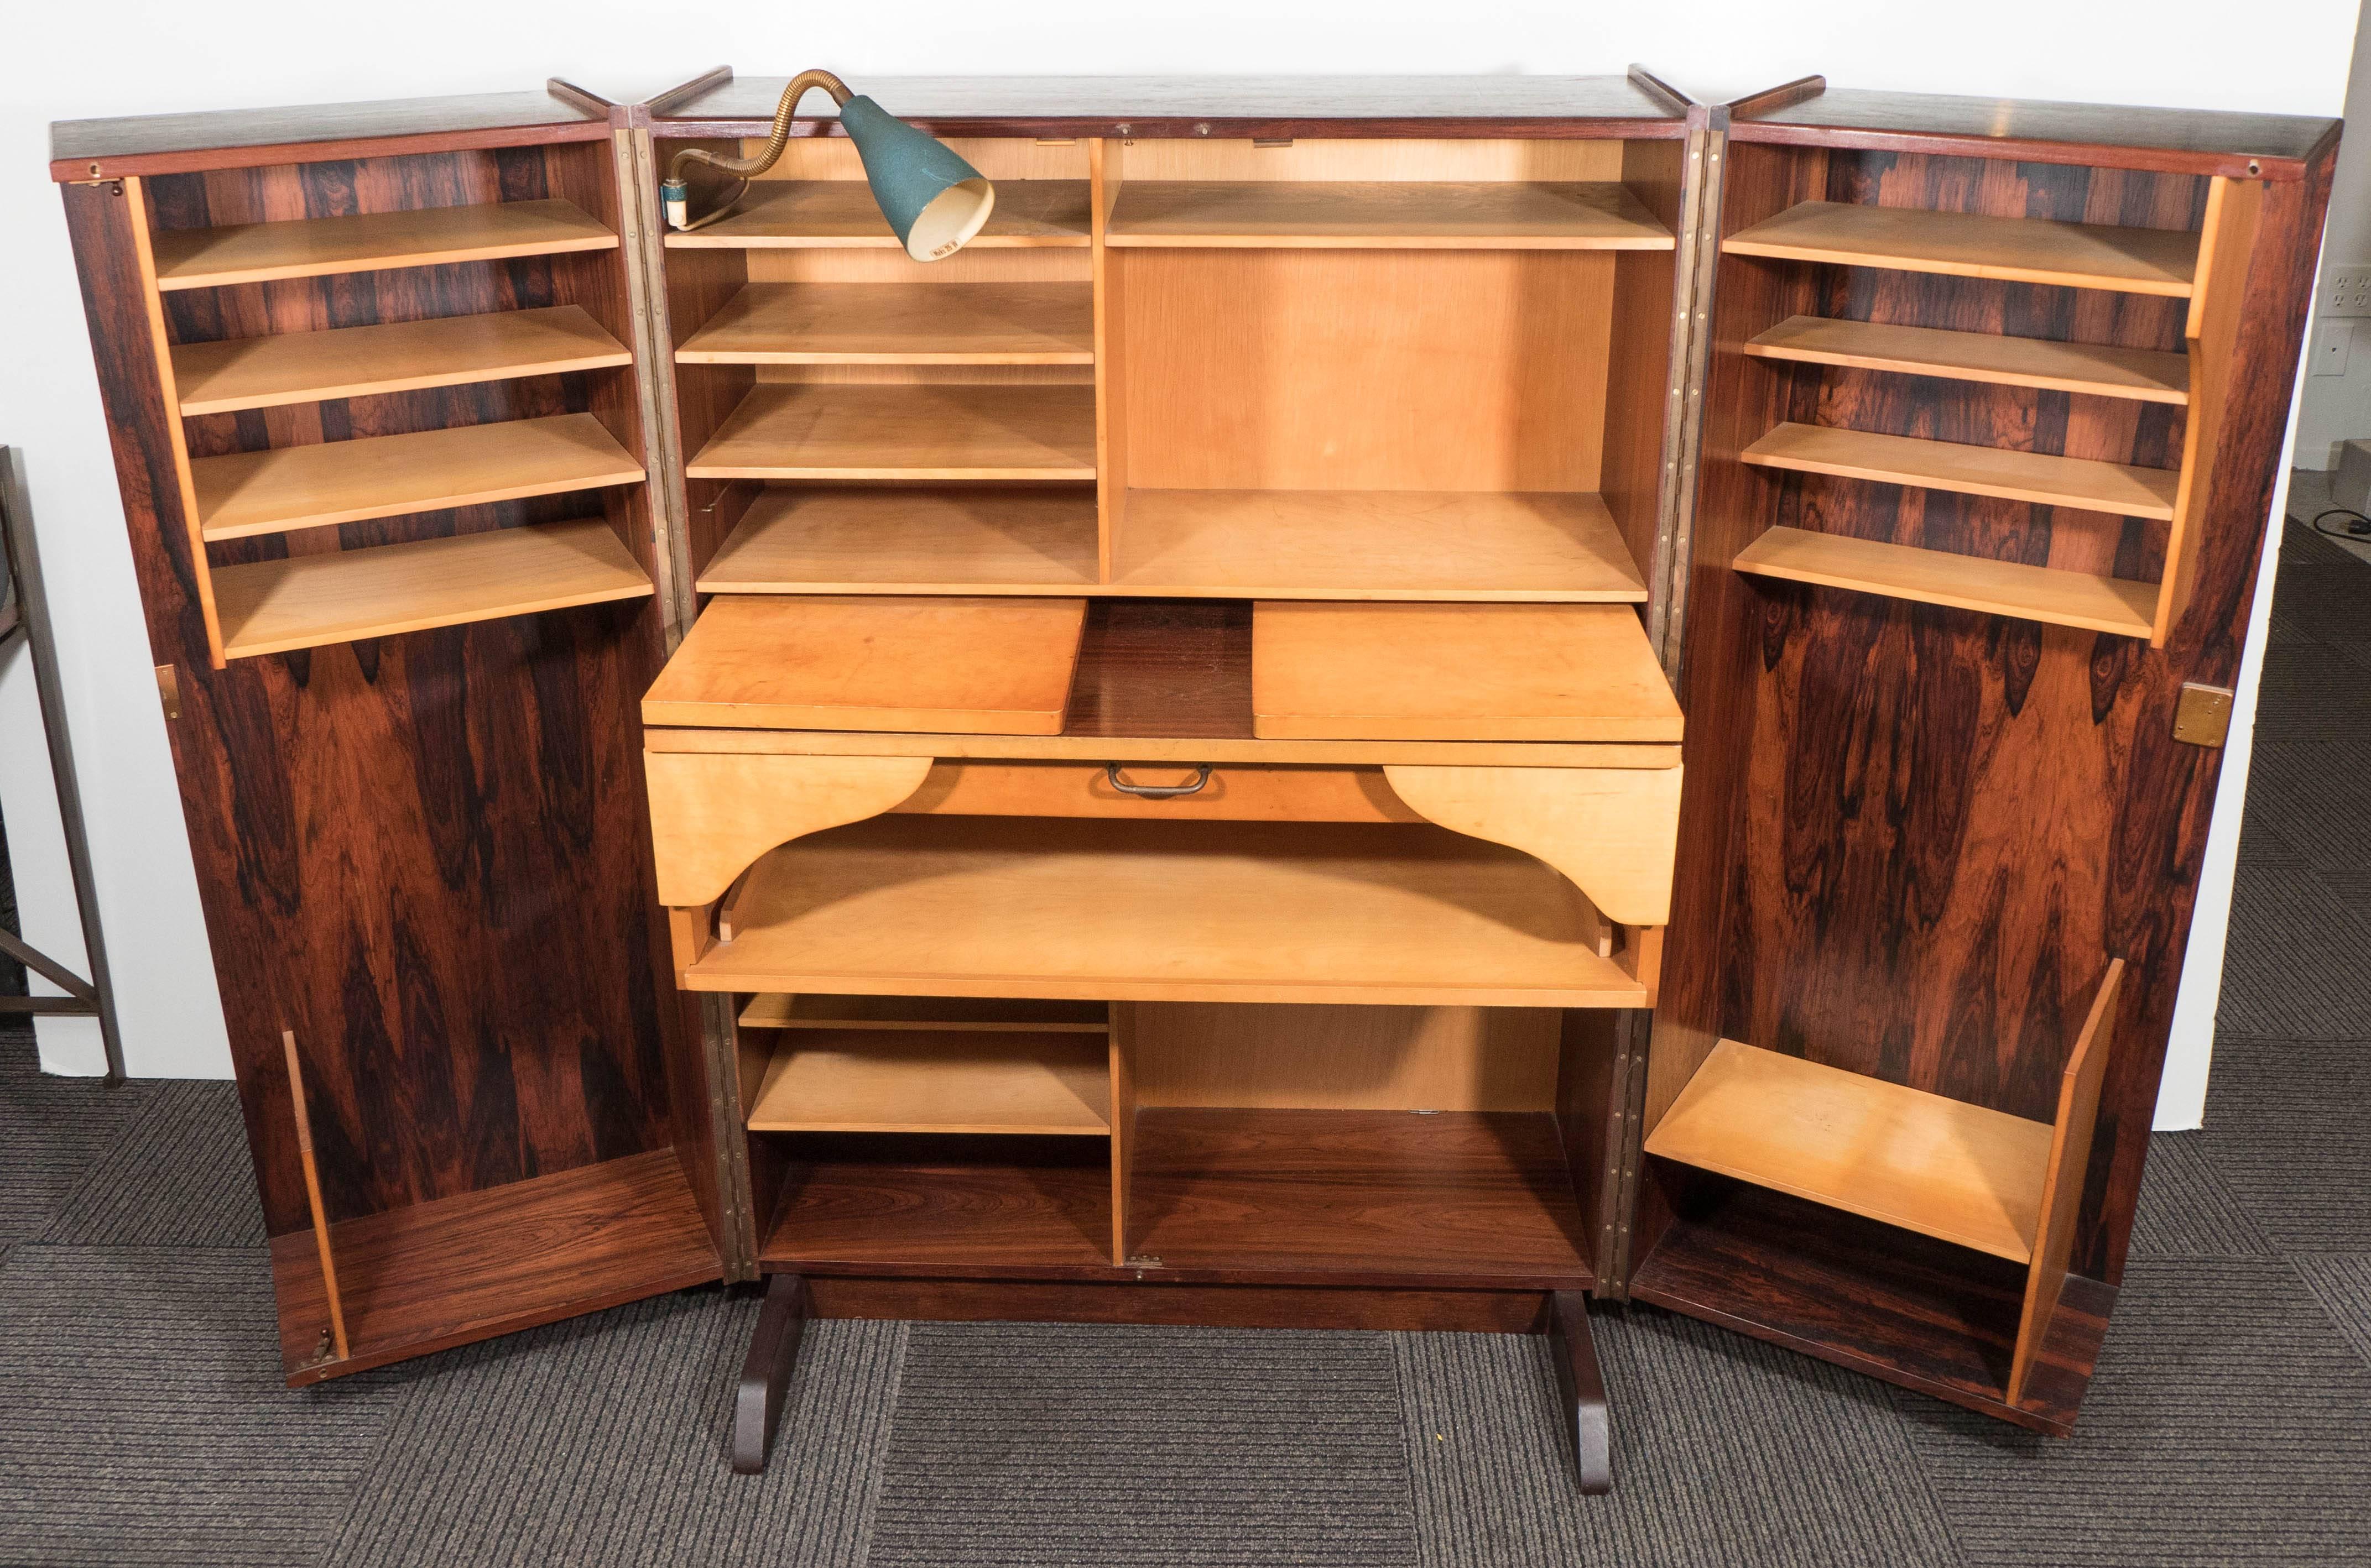 A vintage Norwegian hideaway desk, produced circa 1960s, in the Scandinavian Modern style; this versatile desk can compact into box, veneered in rosewood and expand into a full office with extensive shelving space, desk and foldable leaves, an